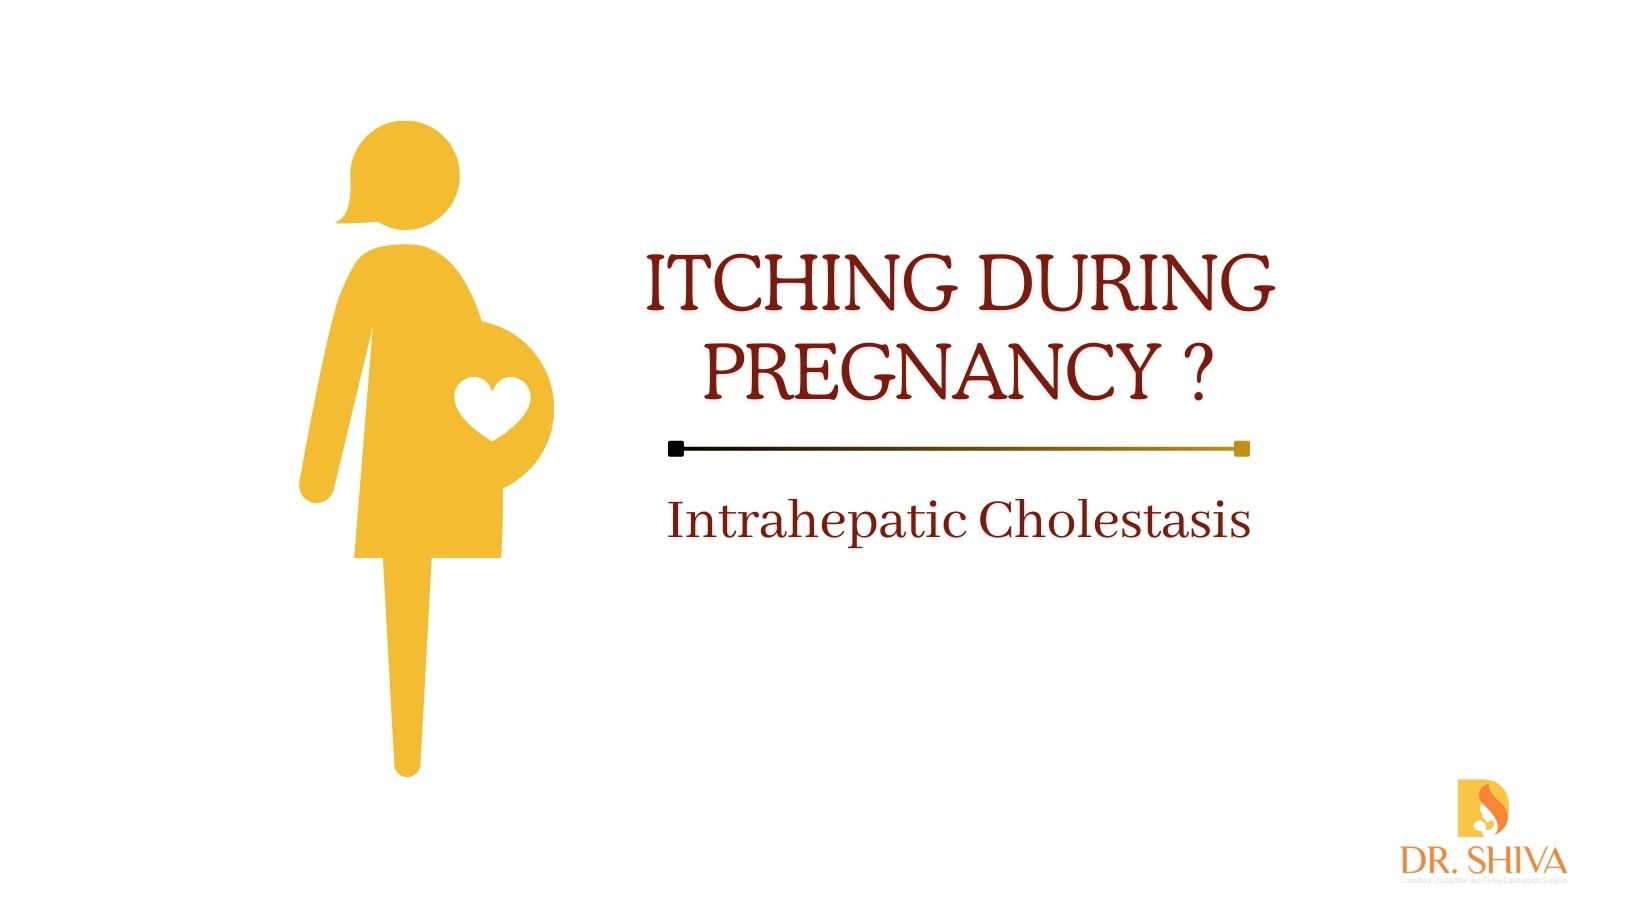 Intrahepatic Cholestasis - severe itching during pregnancy